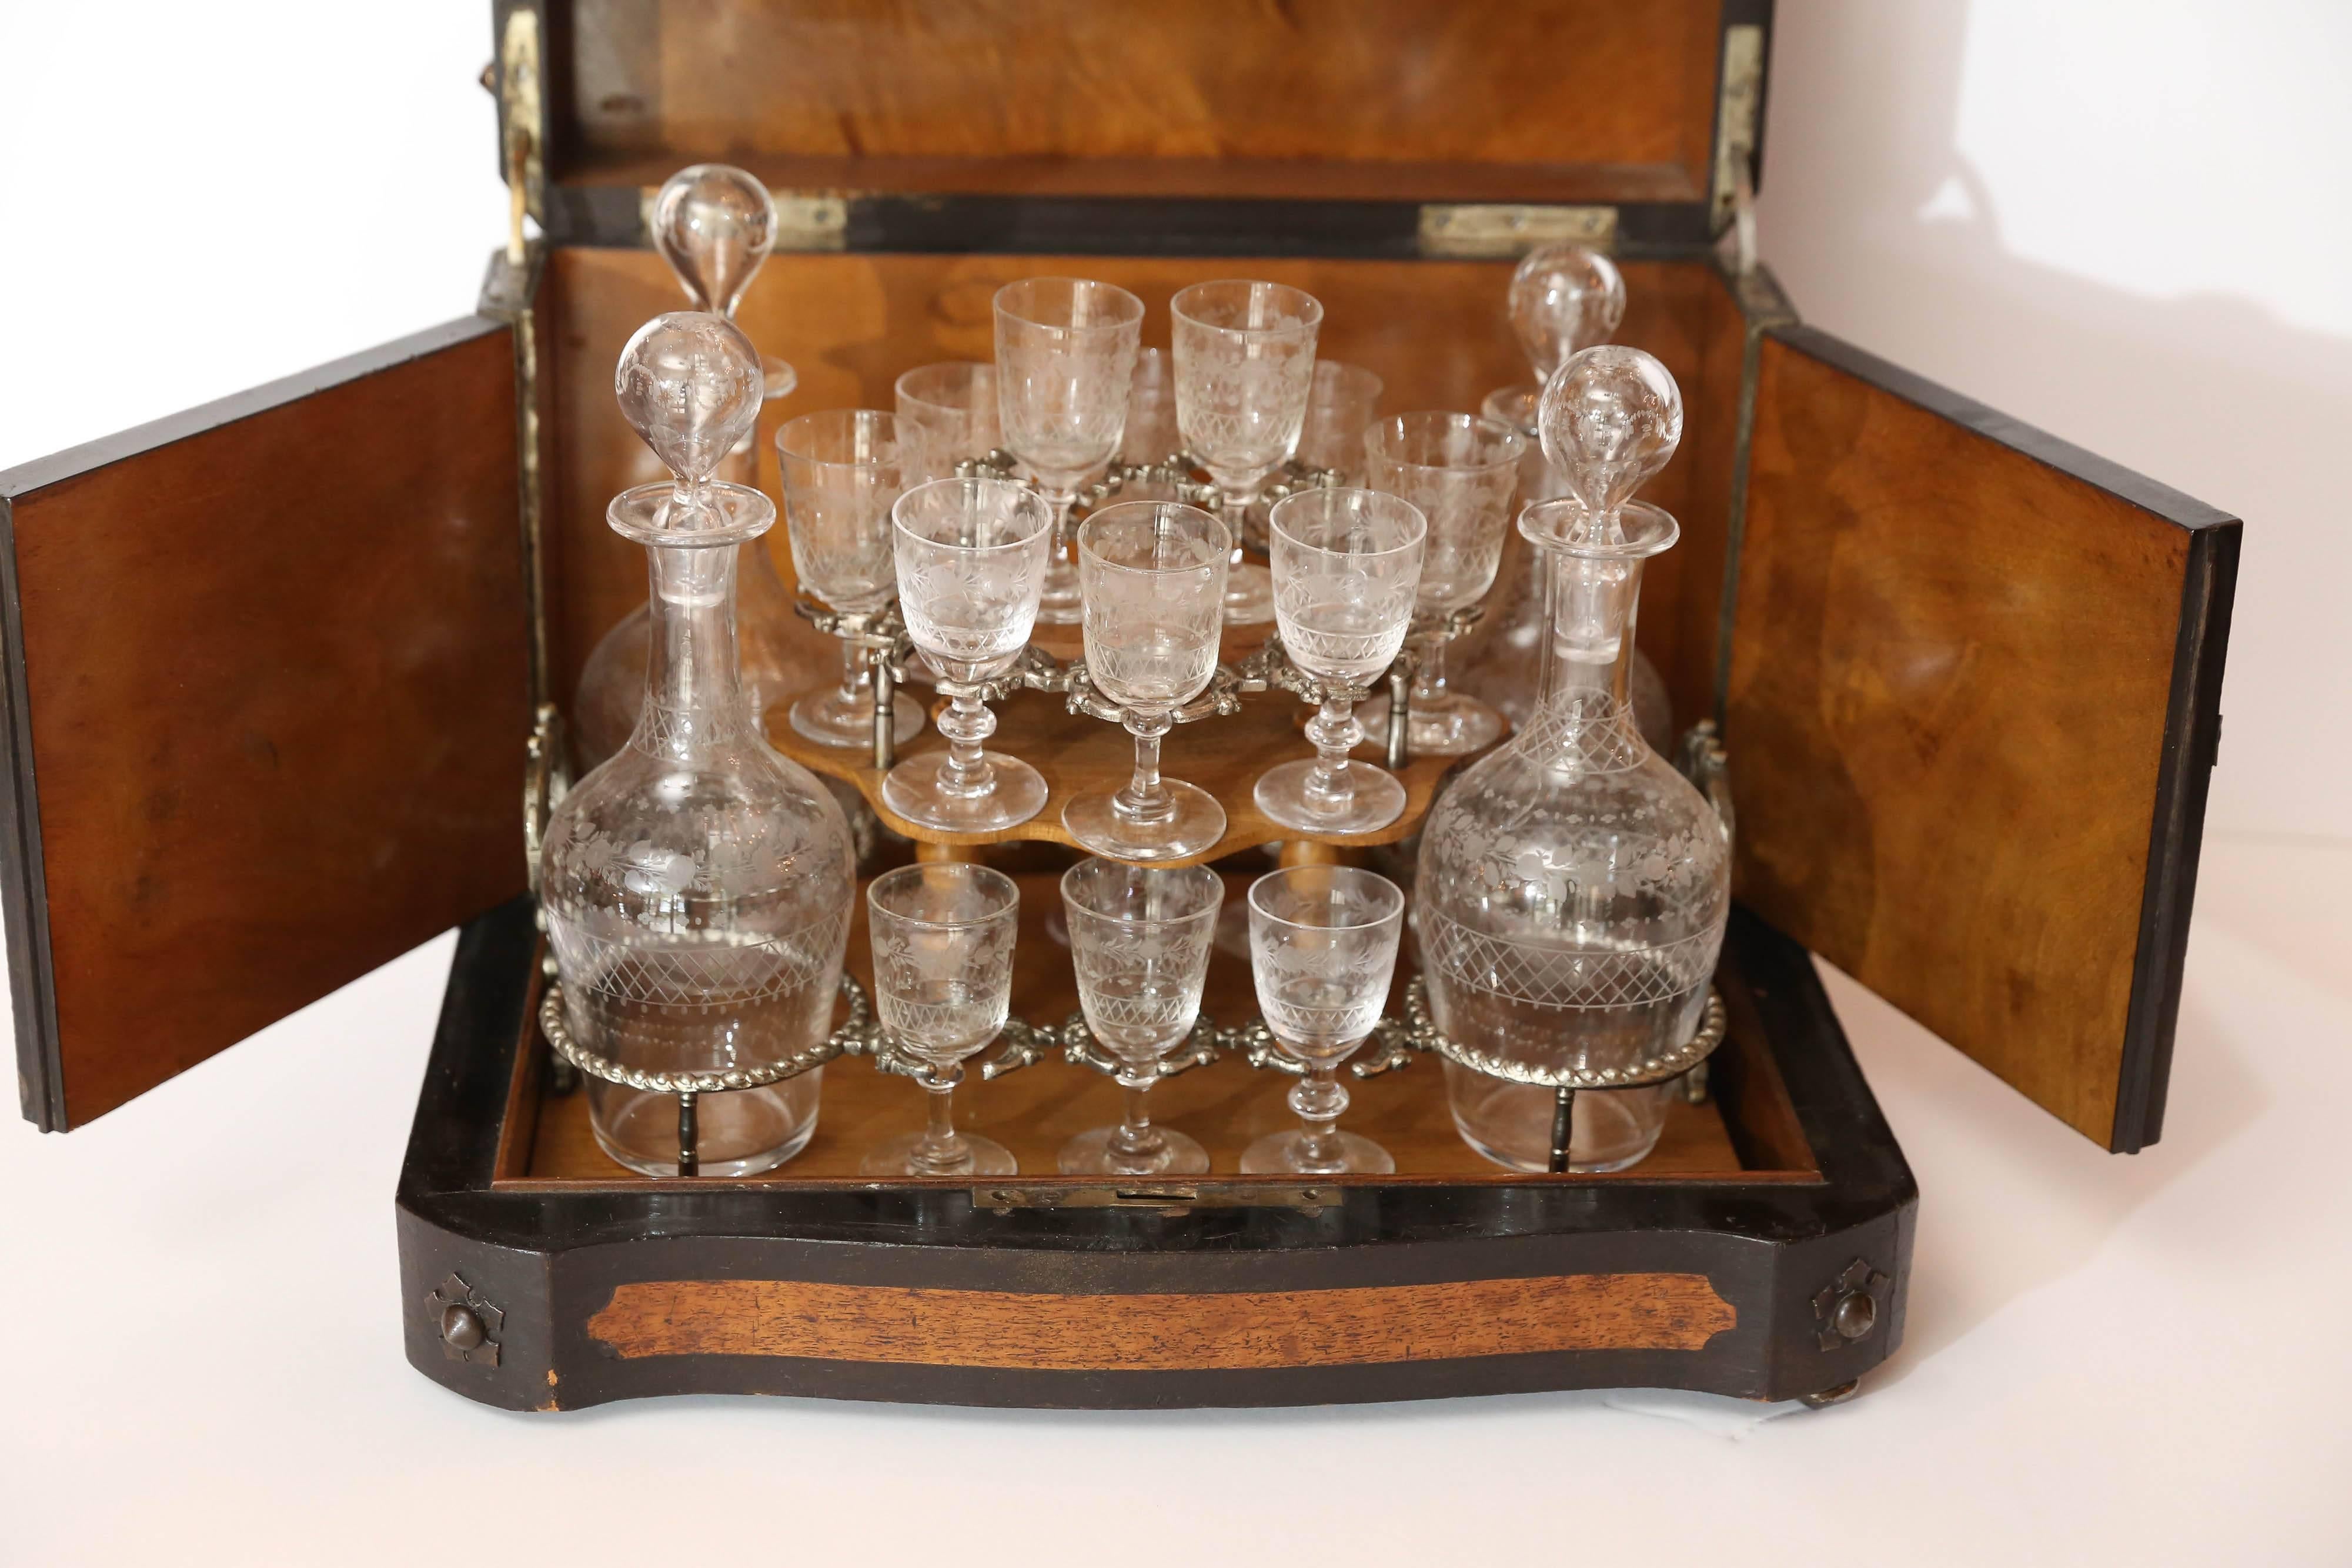 Handsome French Cave de Liqueur set.
Pewter nailheads and decorations to case.
Ebonized banding on a lighter wood case.
16 glasses that are beautifully etched and handblown.
Four bottles that are original.
All sit on a lift out tray.